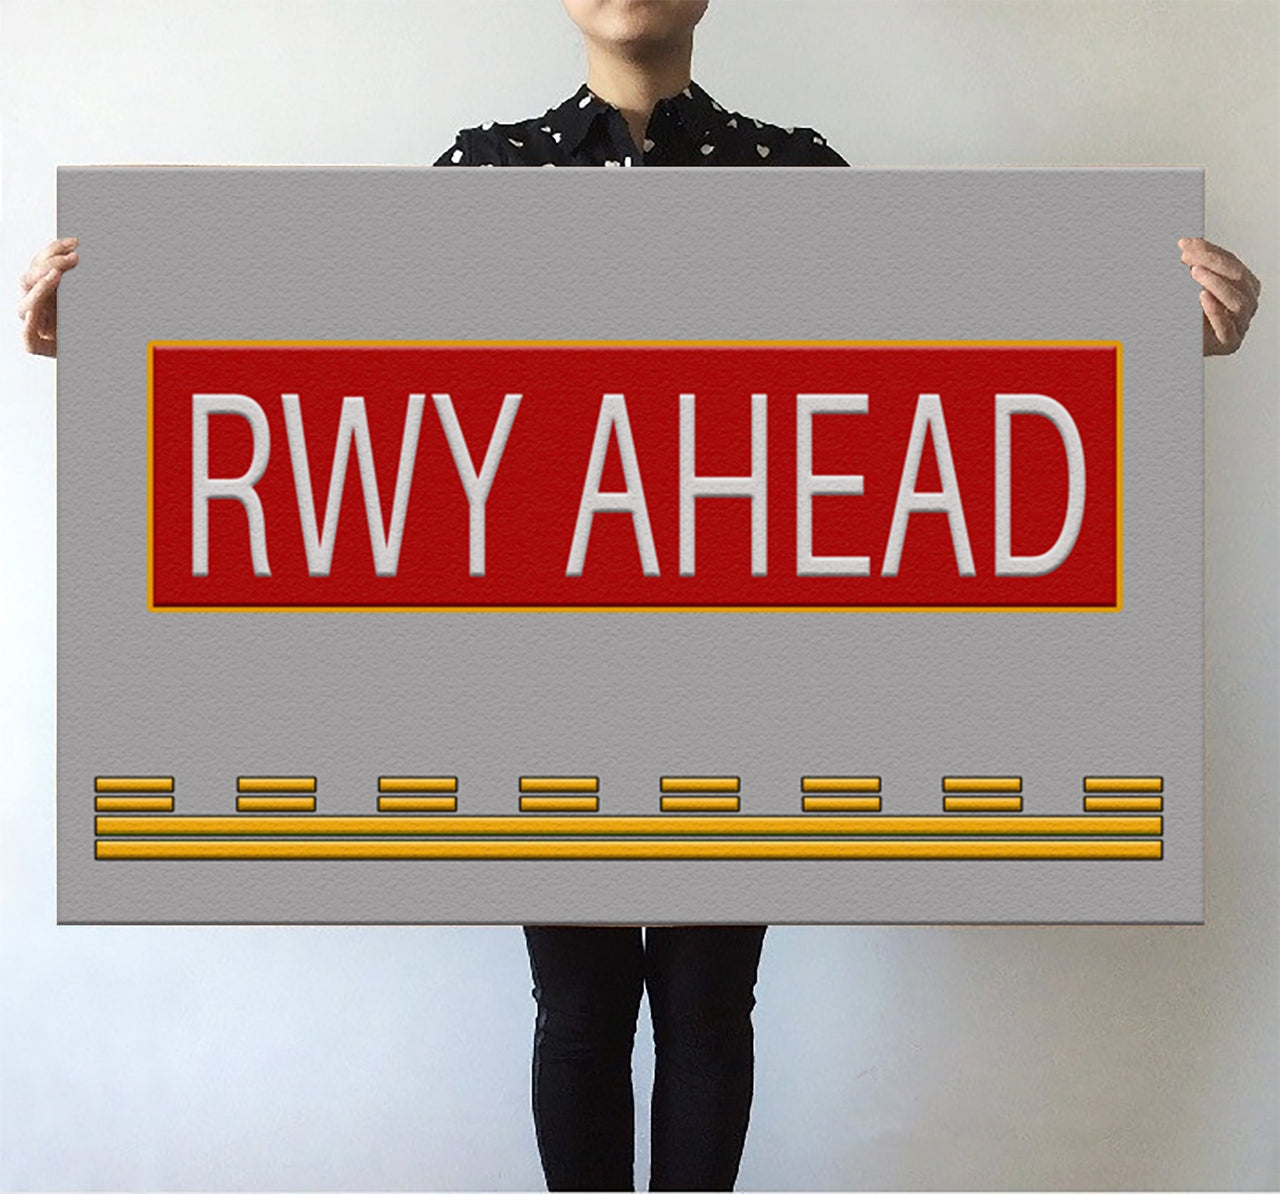 Runway Ahead Designed Posters Aviation Shop 